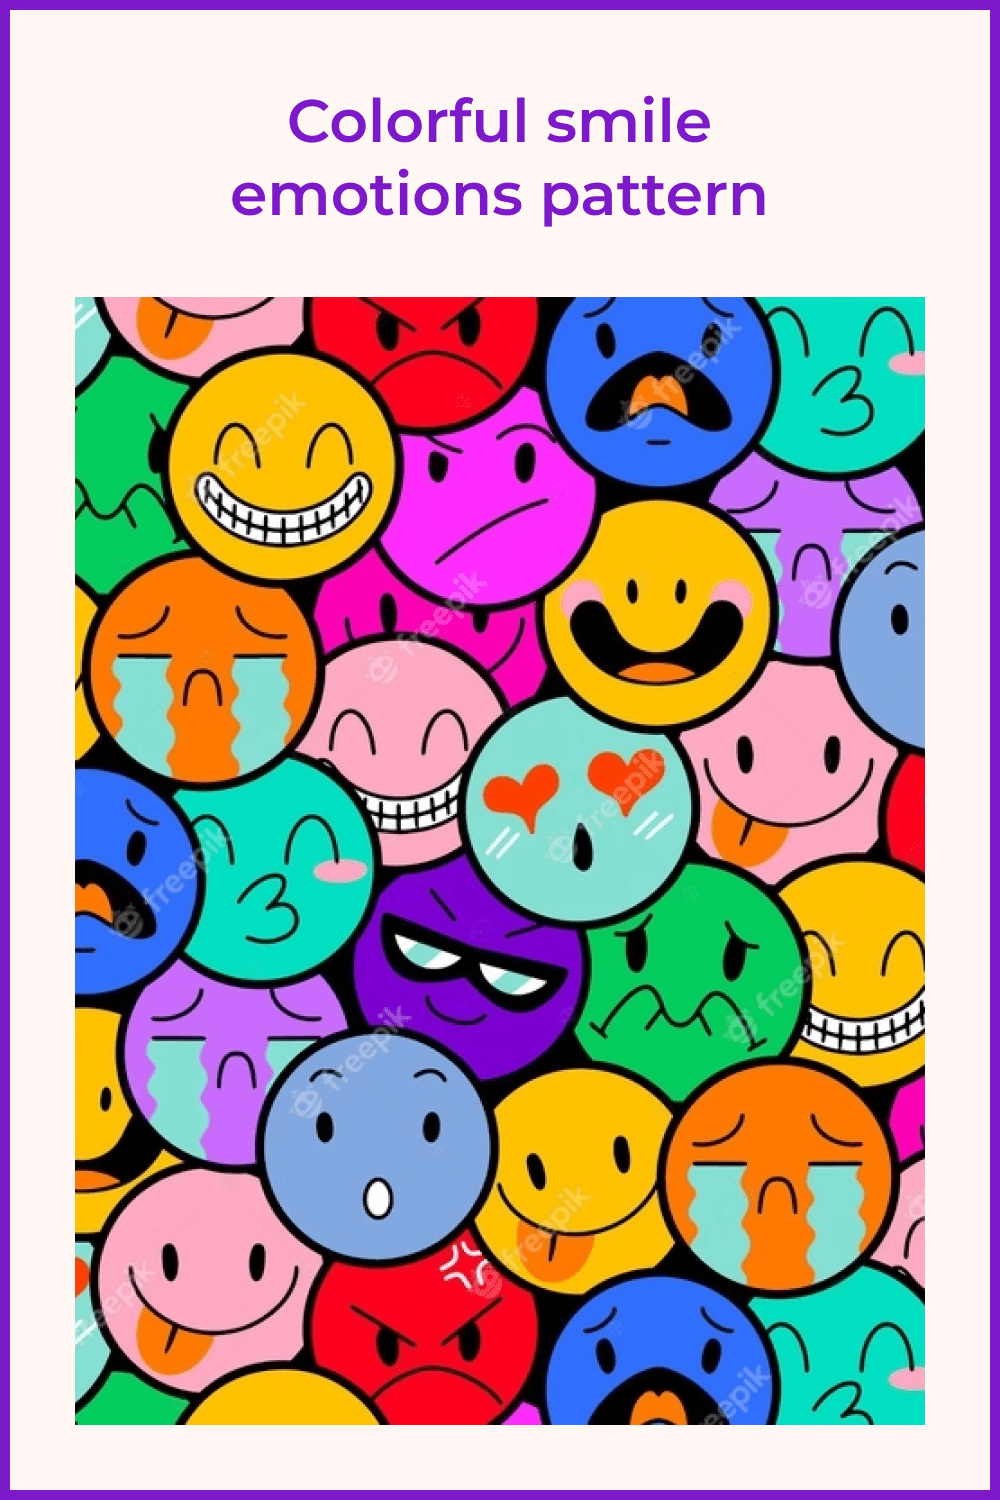 Smilies in the format of illustrations.